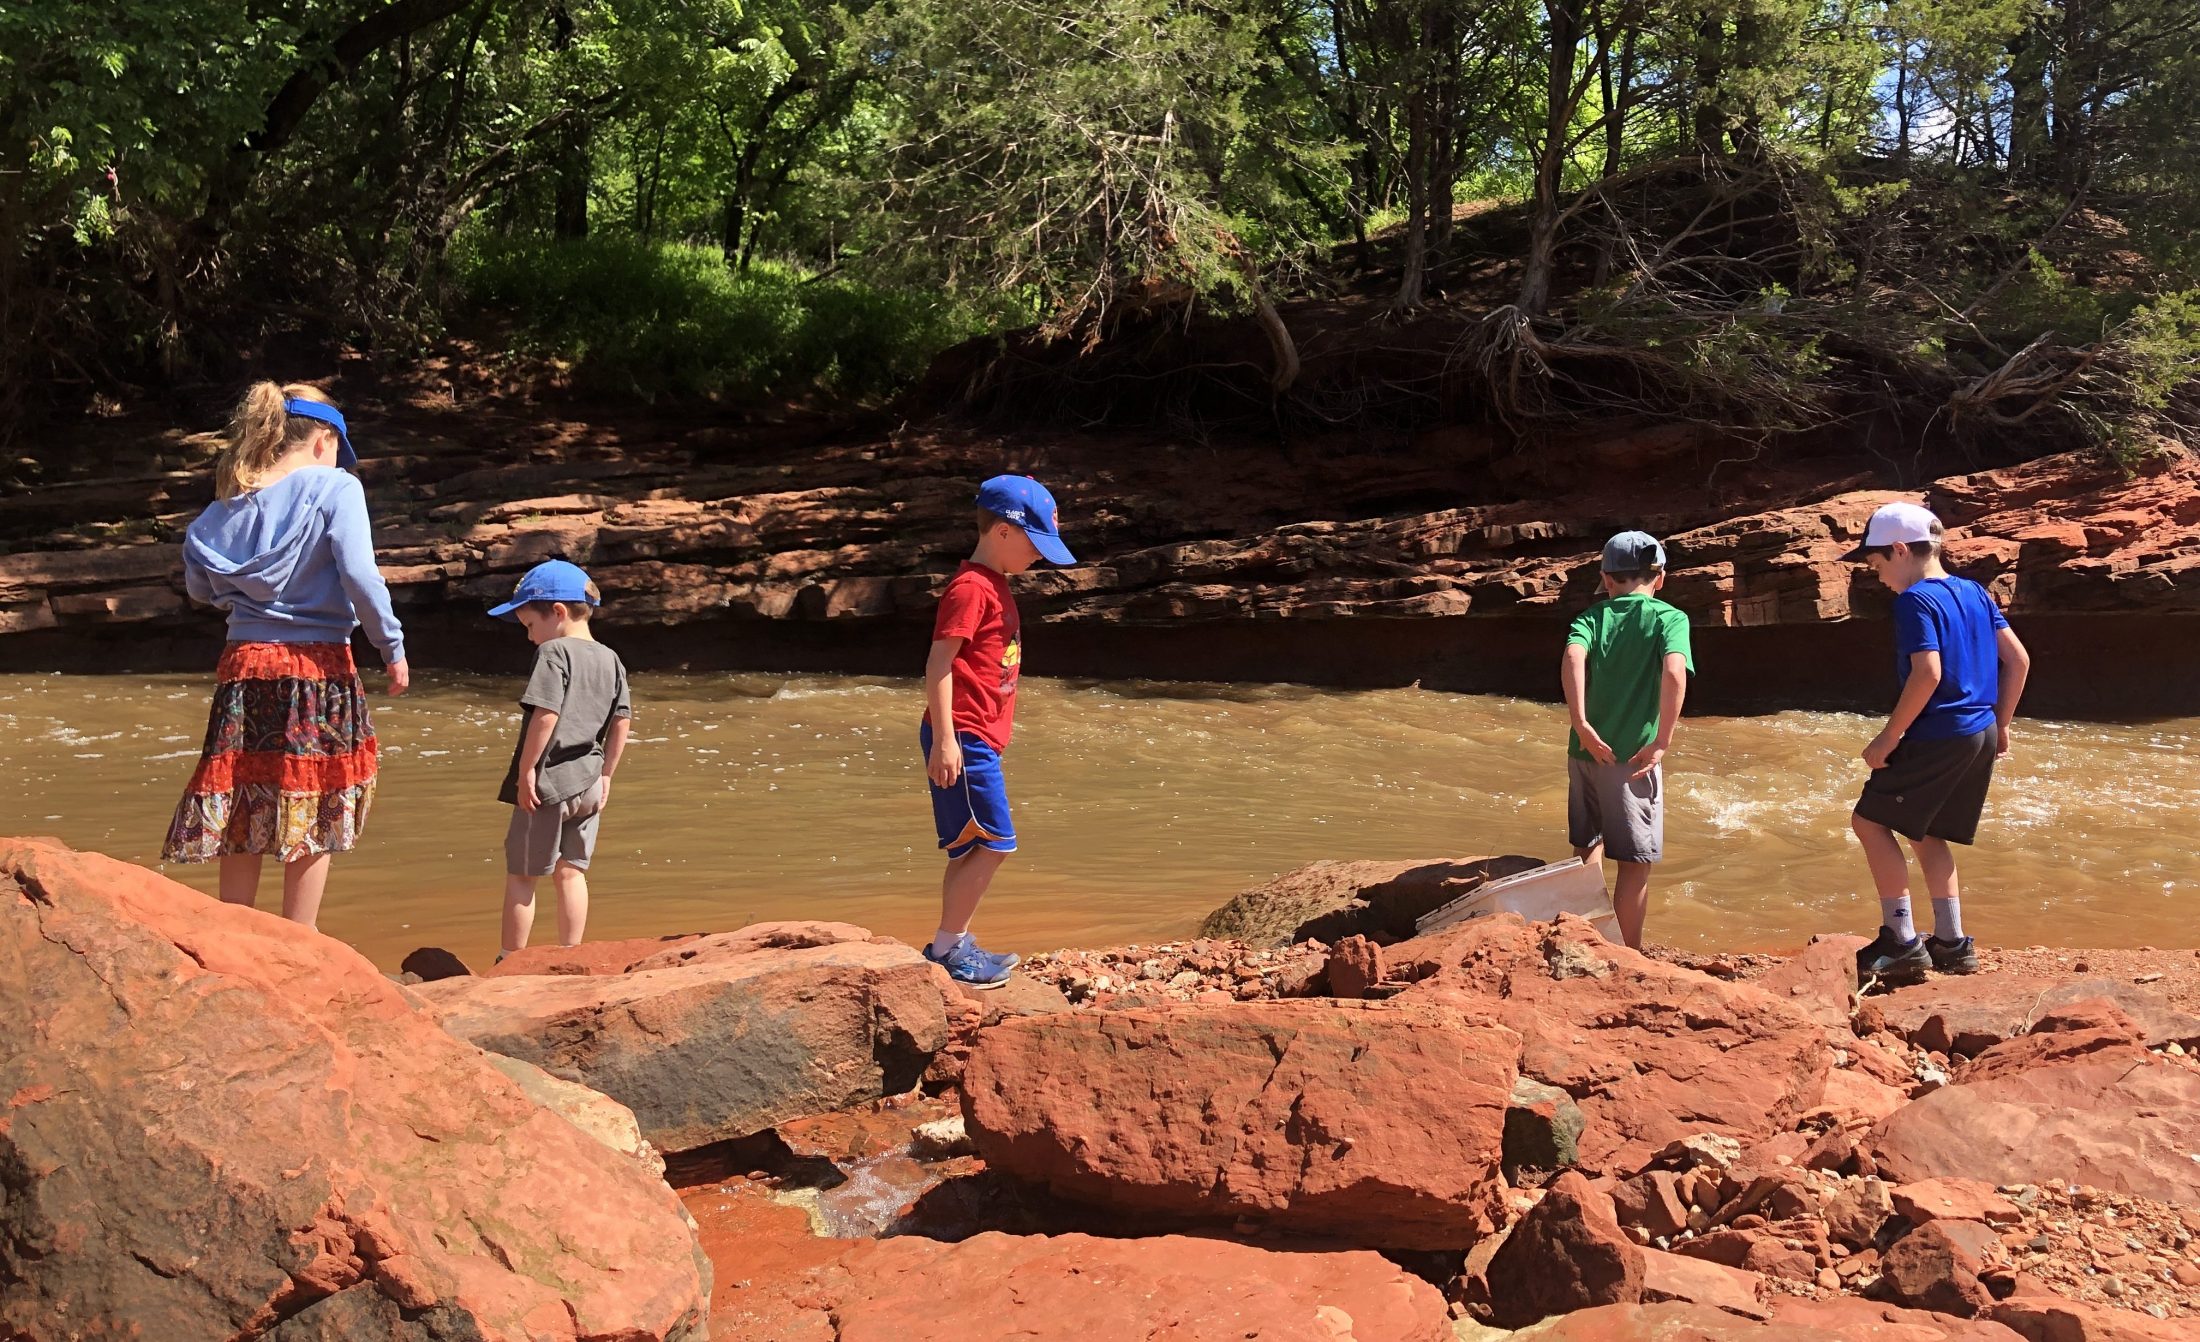 DC widow blog writer Marjorie Brimley's children and their cousins play along a river